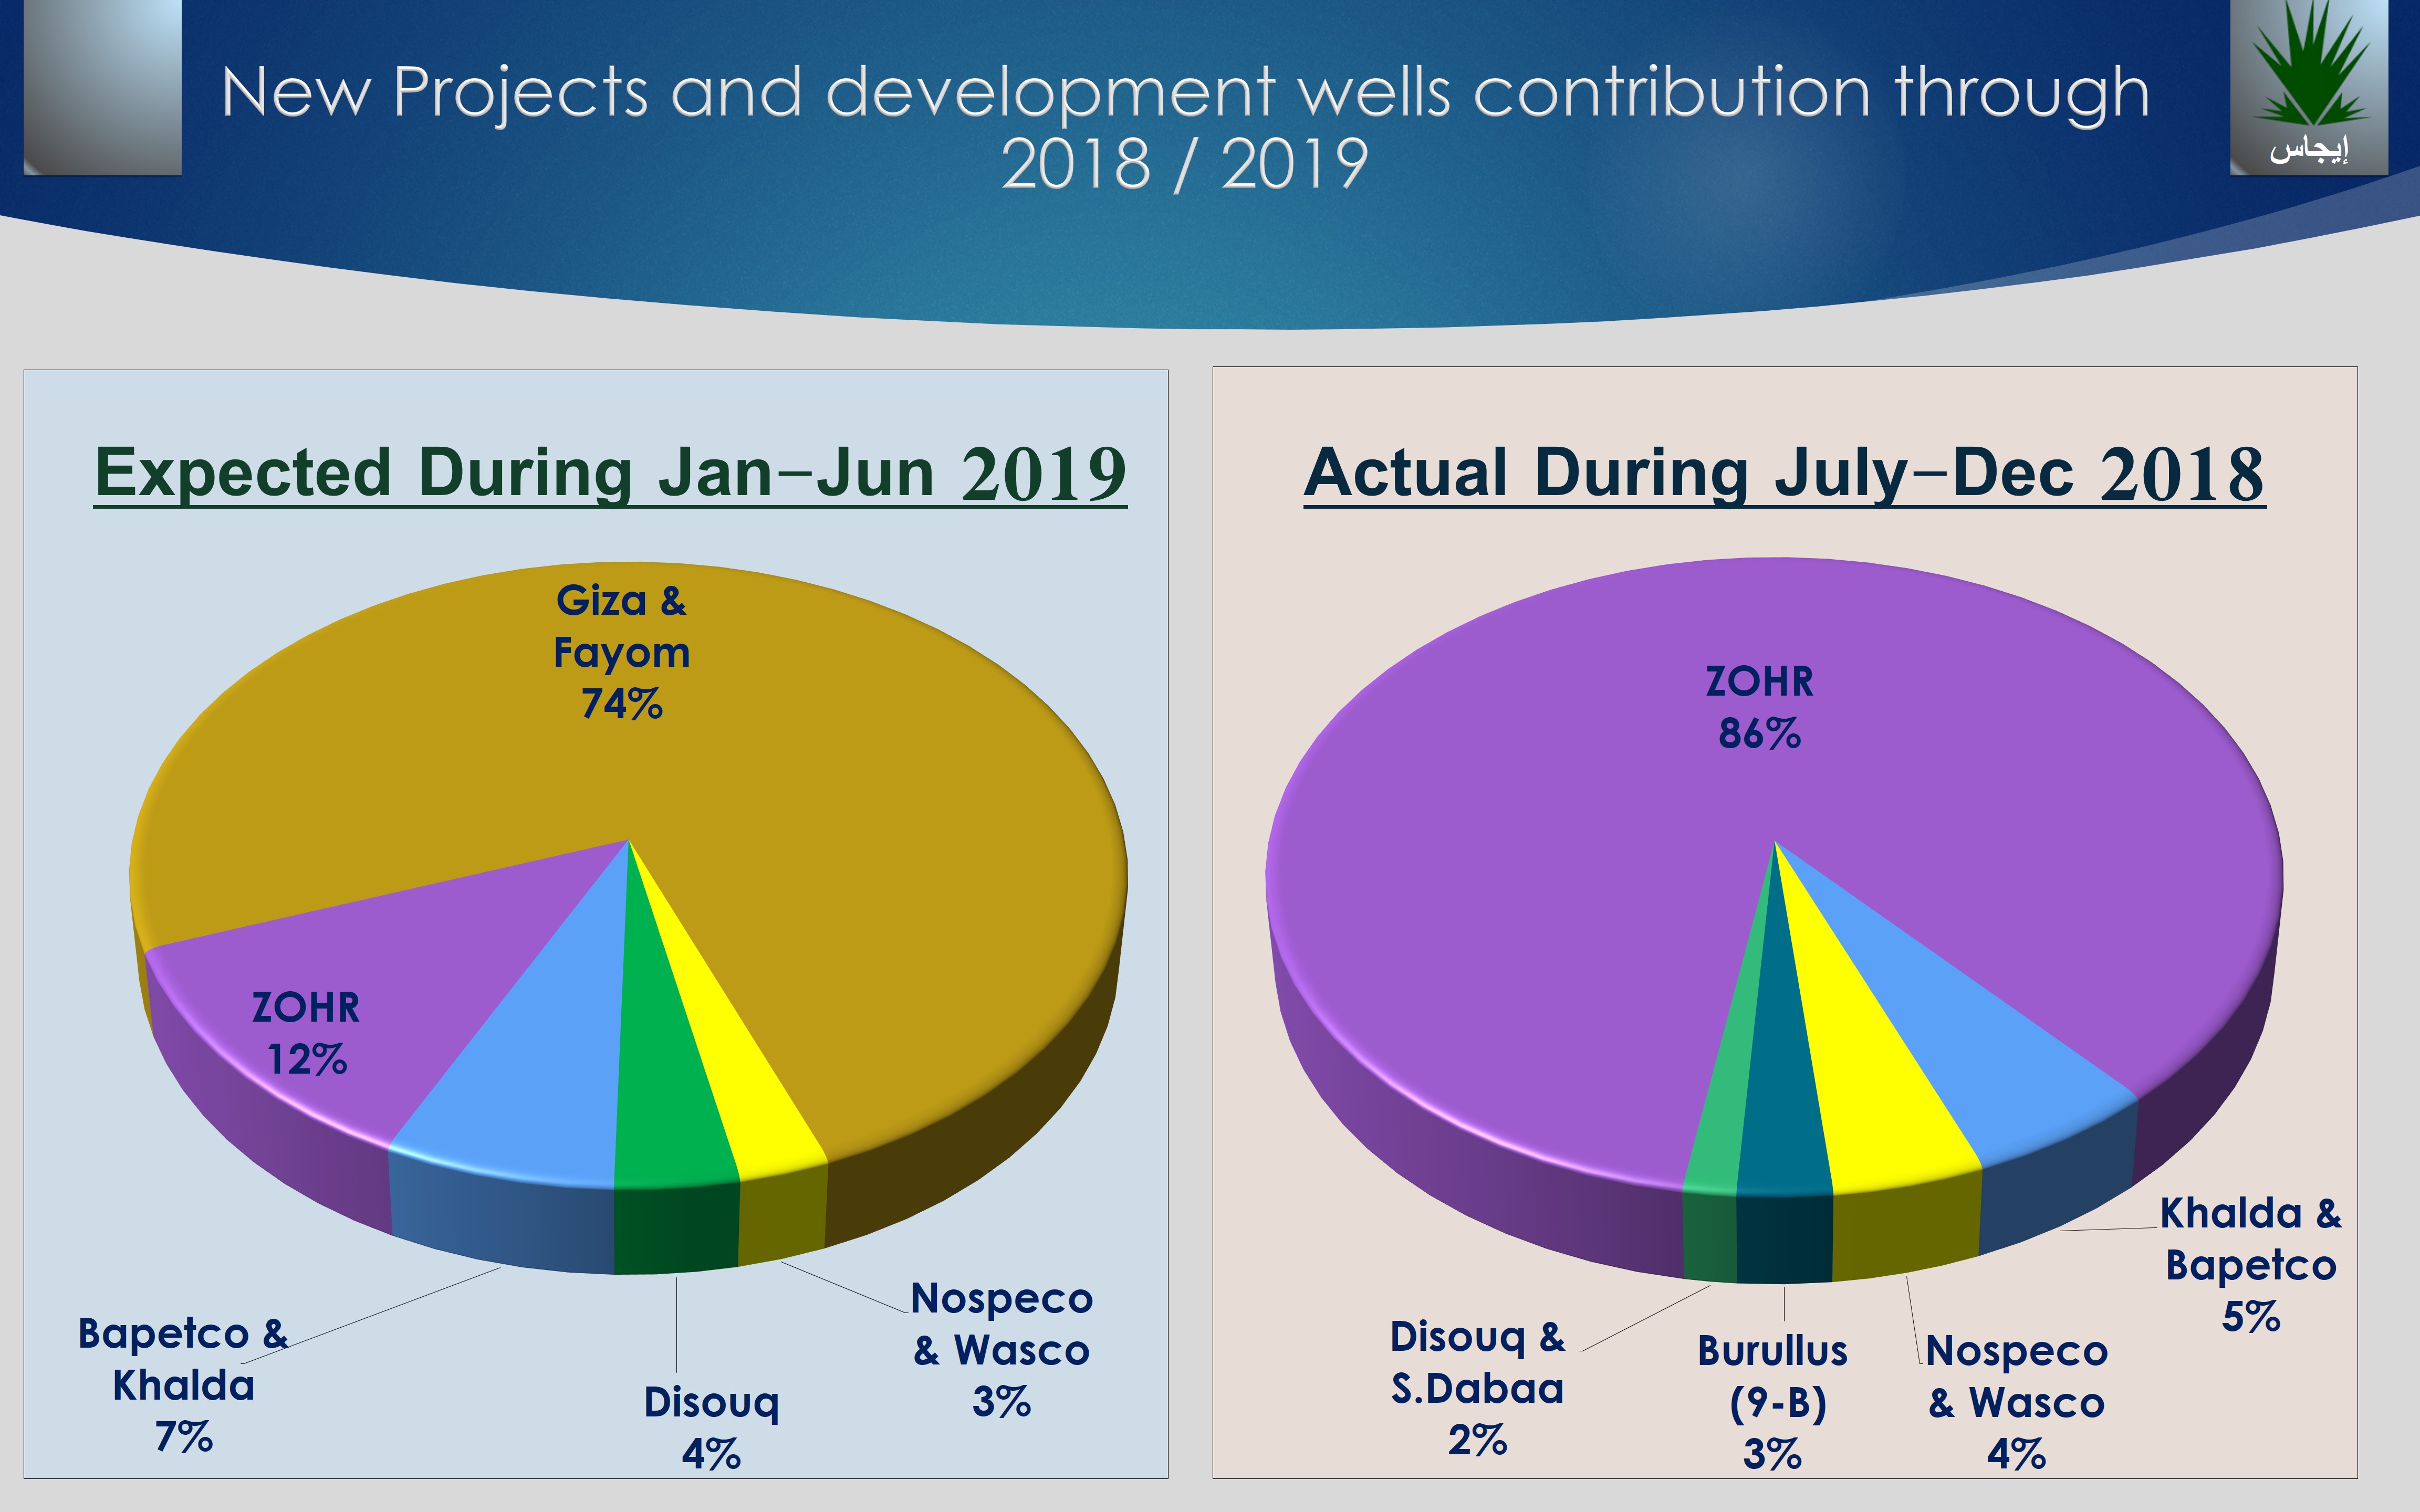 New Projects and development wells contribution through 2018 / 2019